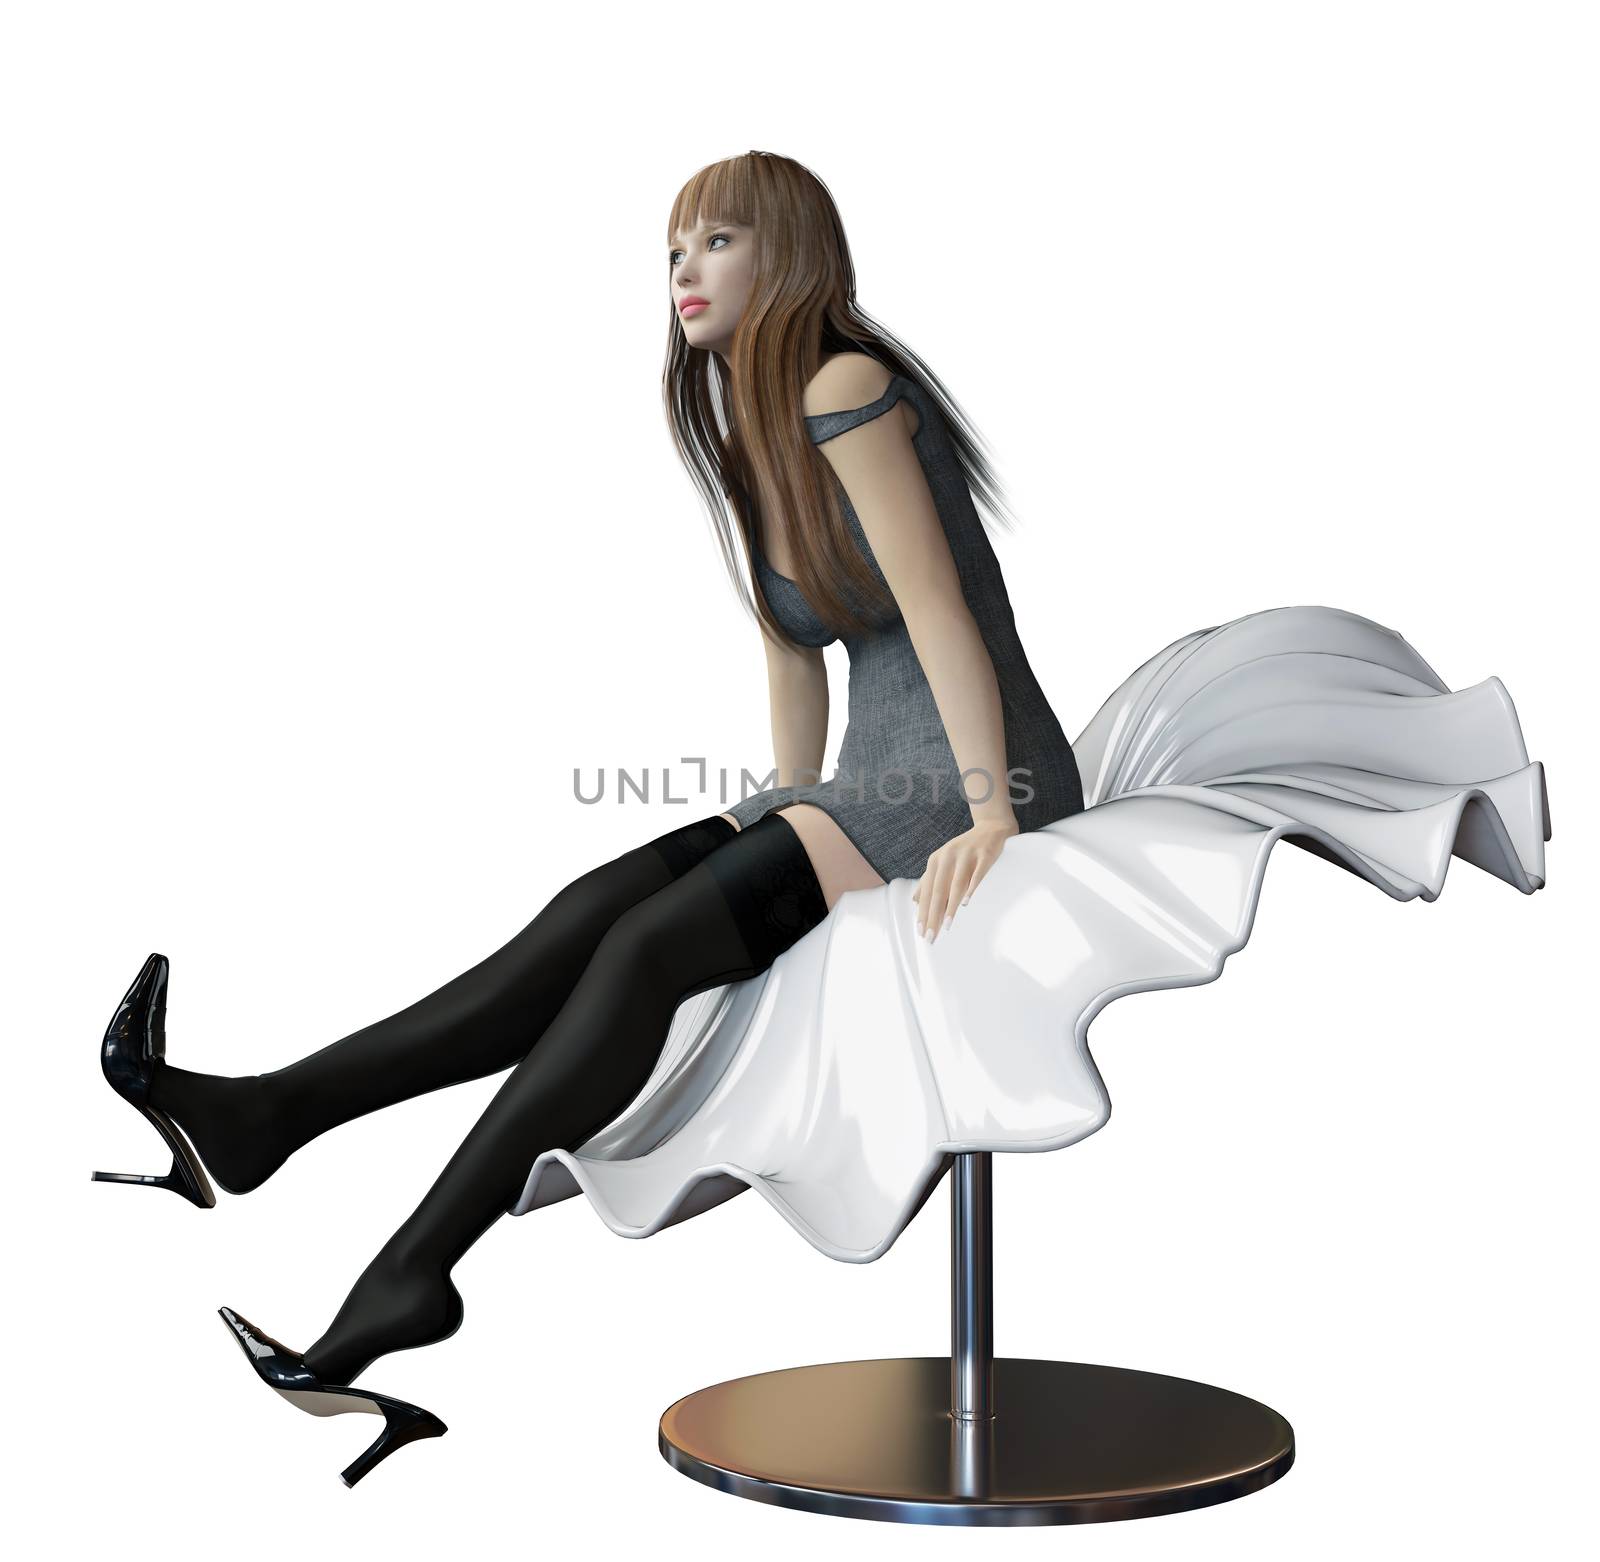 A sexy white woman, whit black high heels shoes, short skirt or robe and long hair, sitting in a futuristic plastic flowing sheet bench or chair, isolated against a white background.